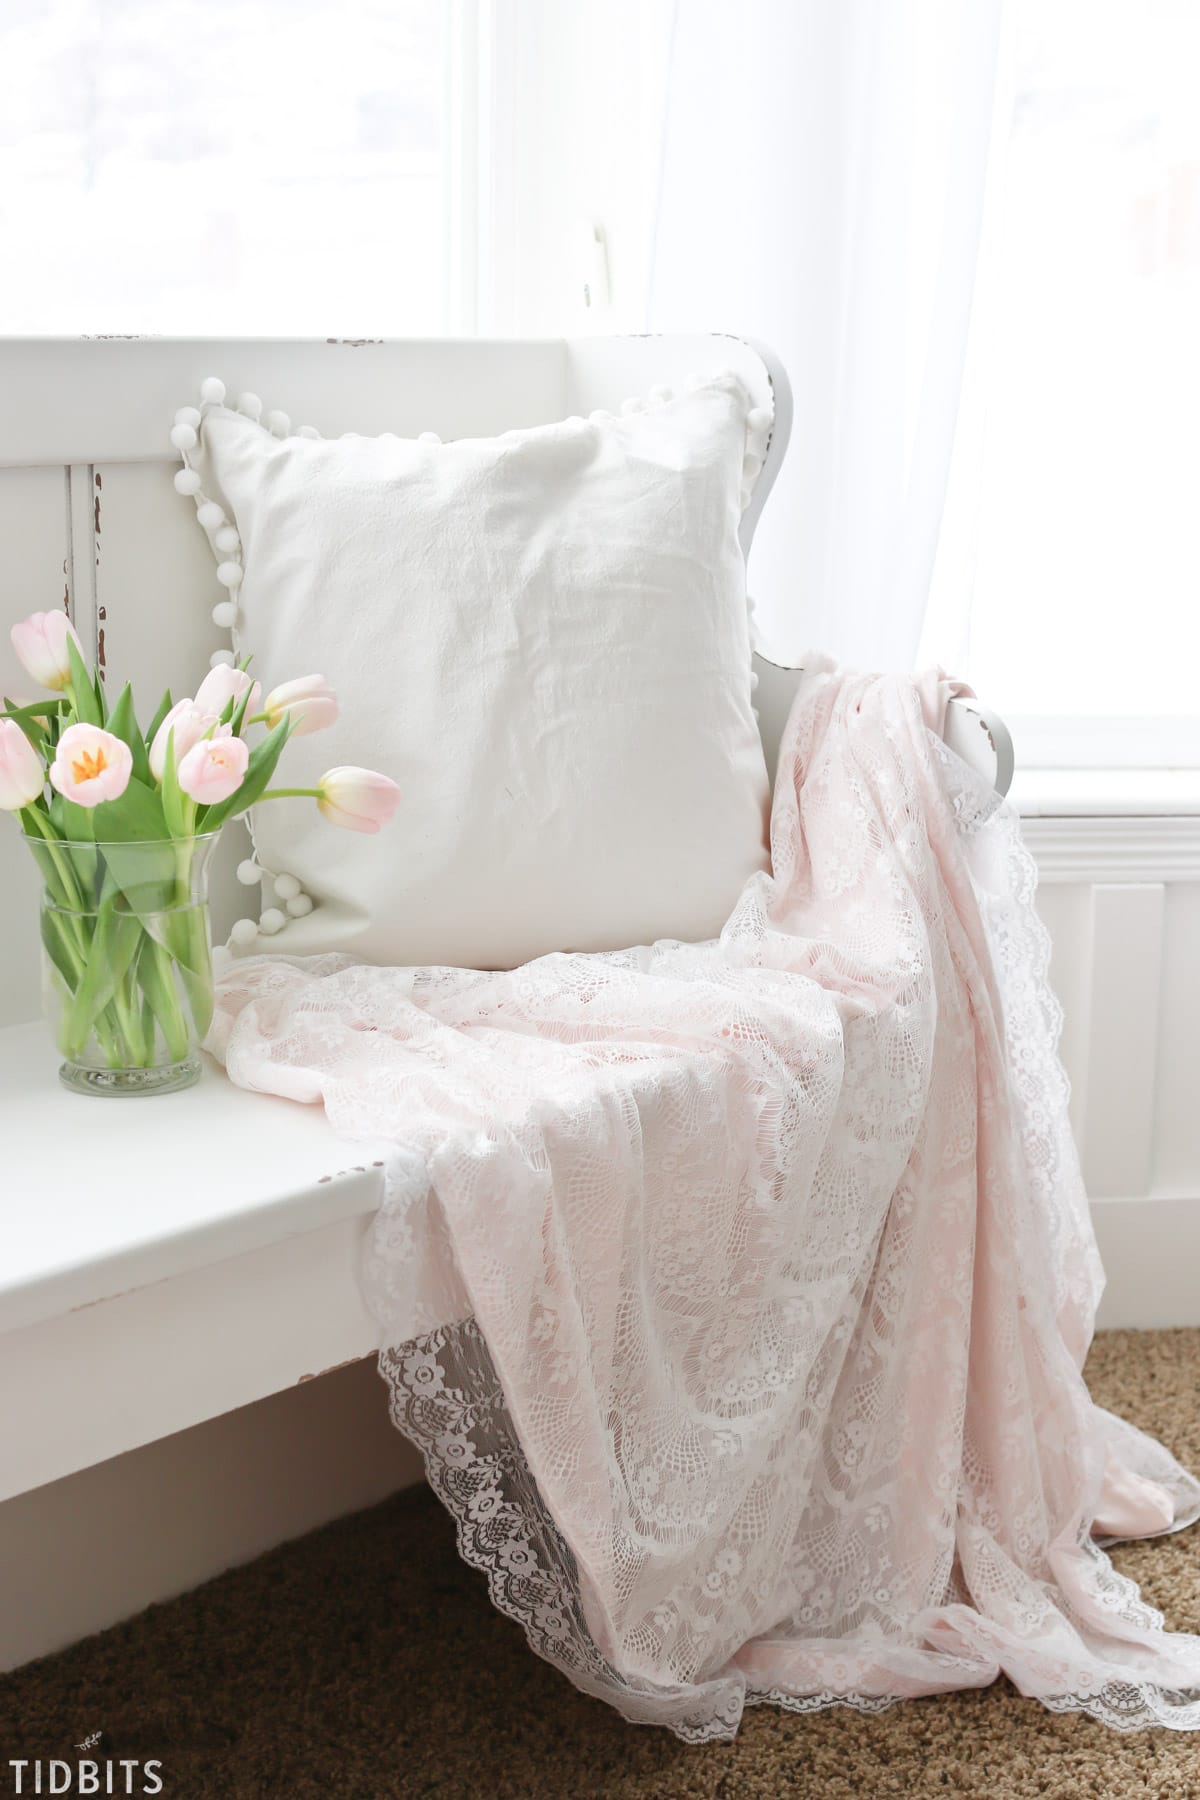 DIY Valentines Lace Throw Blanket - romantic luxury at its best!